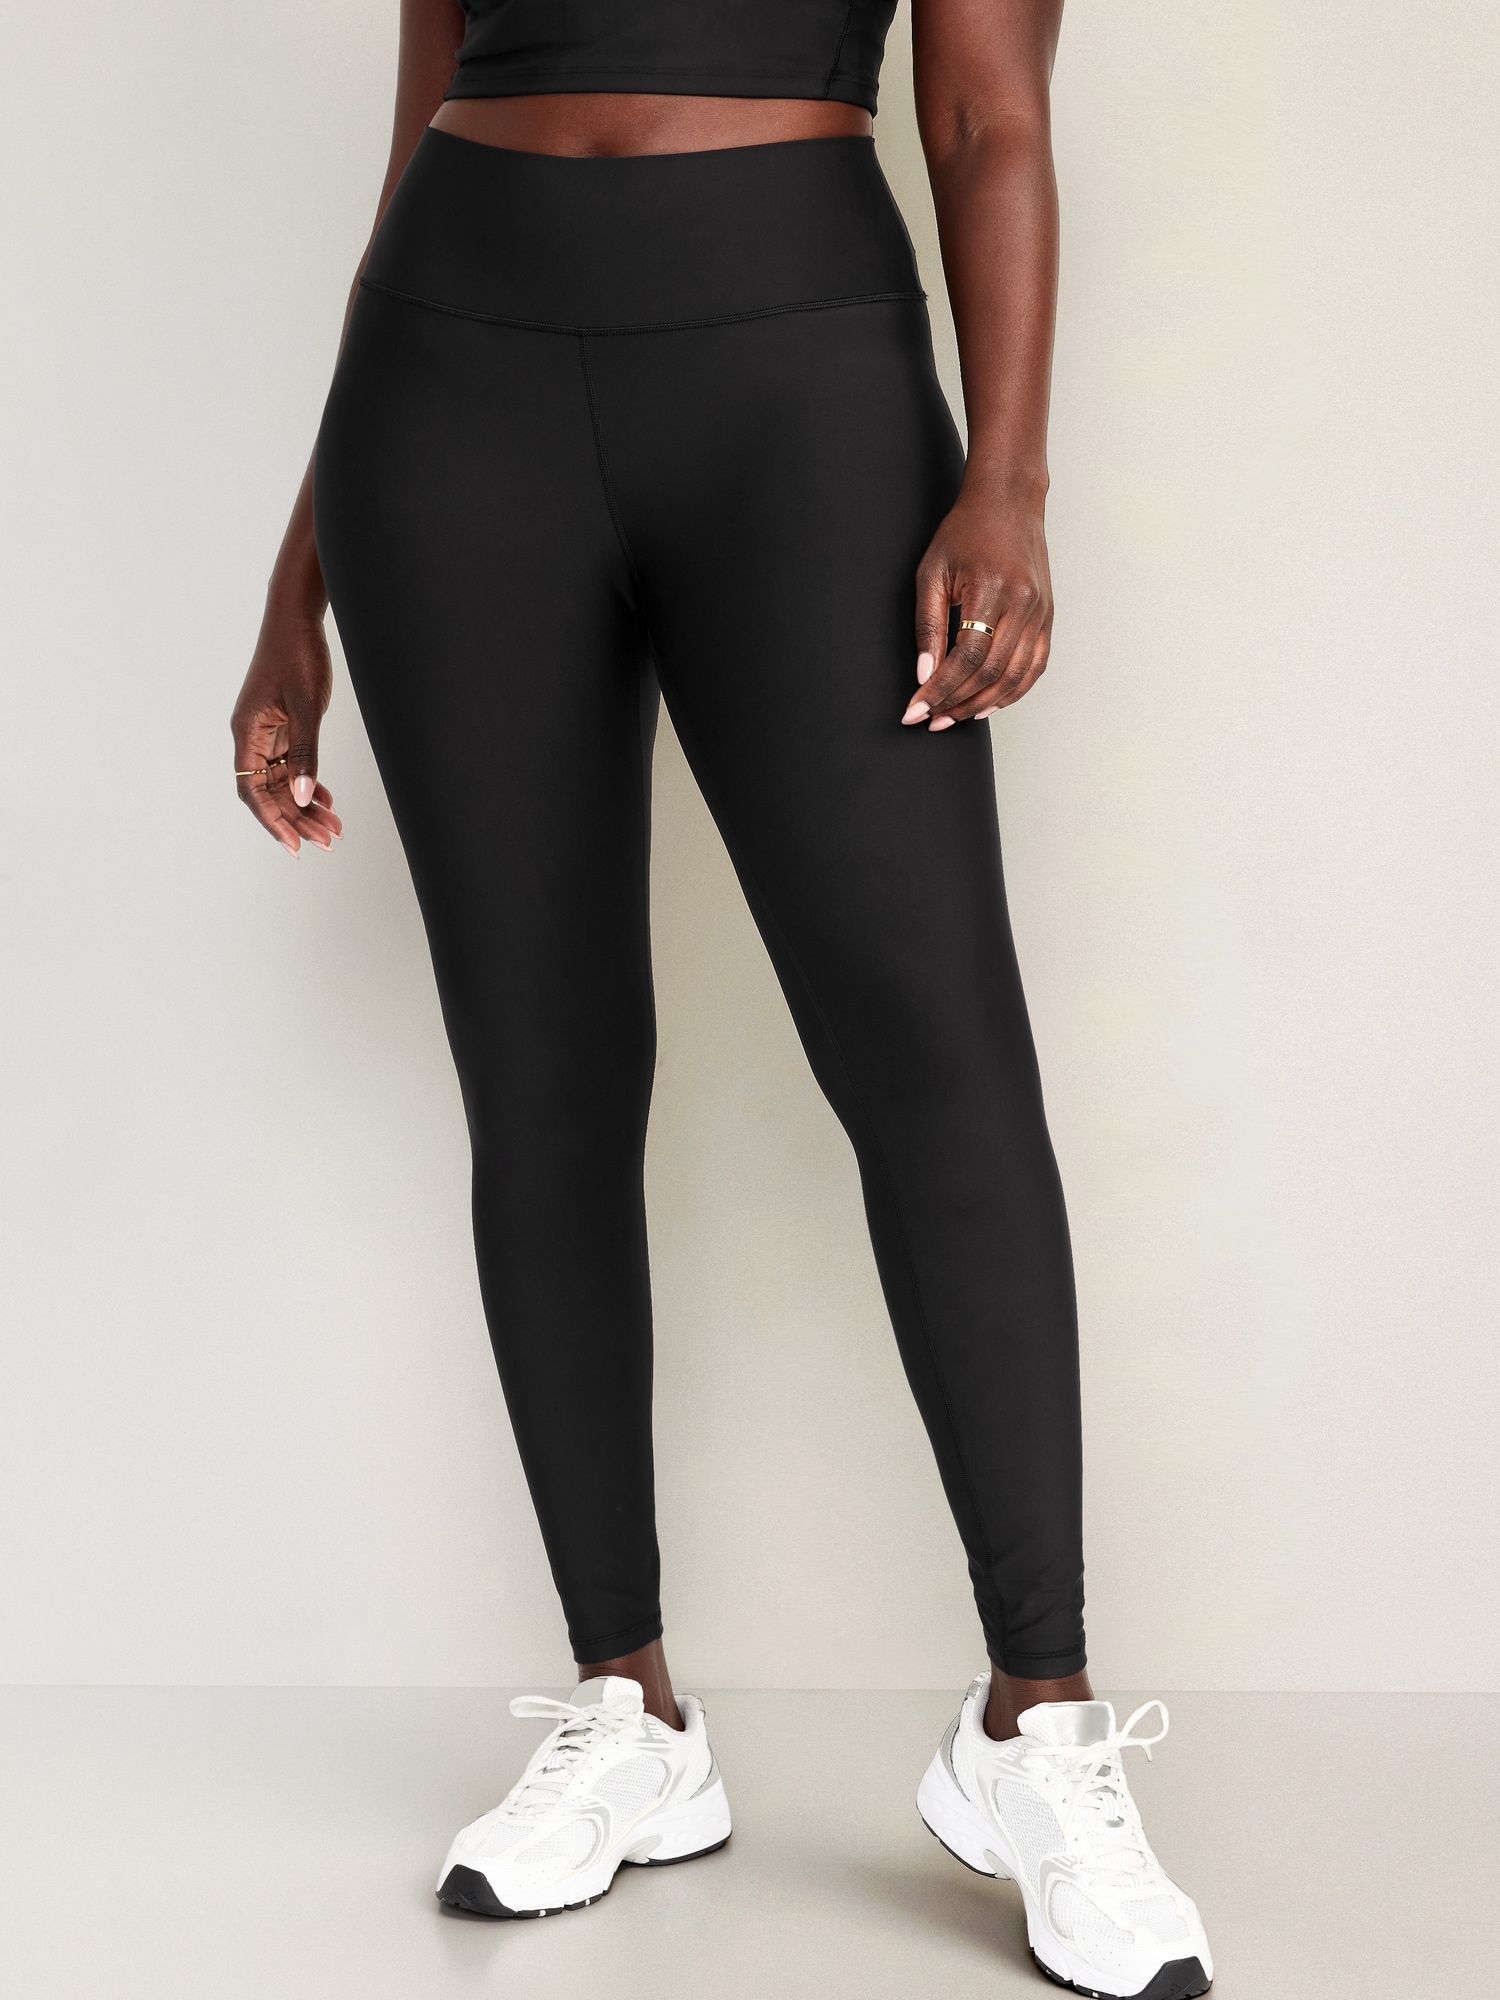 Old Navy Active Powersoft Leggings Blue Size M - $16 (46% Off Retail) -  From Natalie